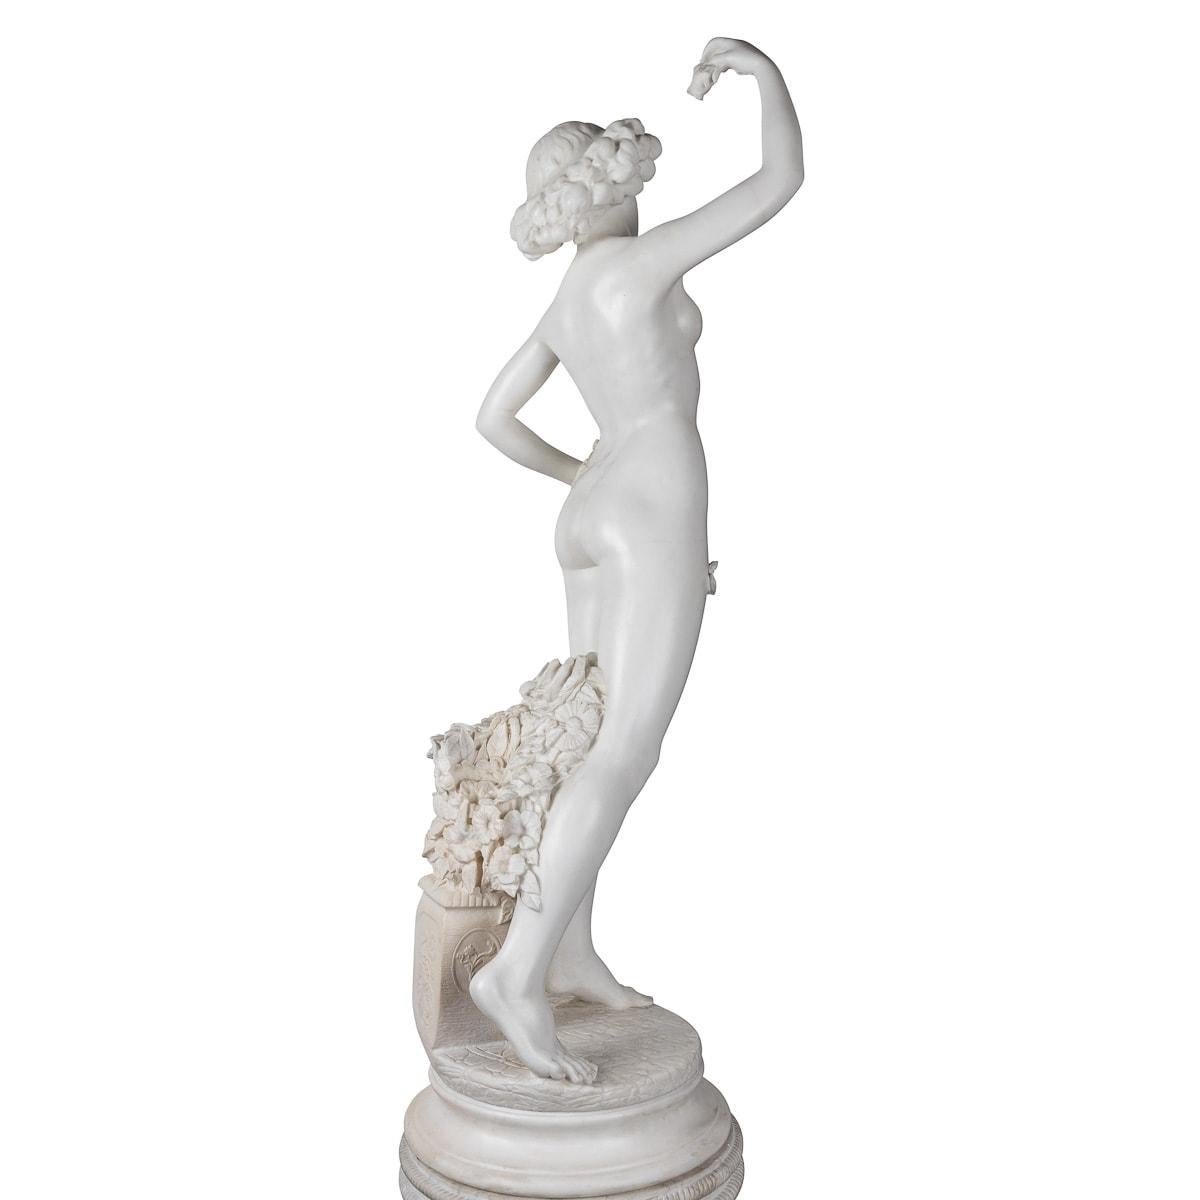 19th Century Italian Marble Figure Of A Nude, Adolfo Cipriani (1880-1930) In Good Condition For Sale In Royal Tunbridge Wells, Kent